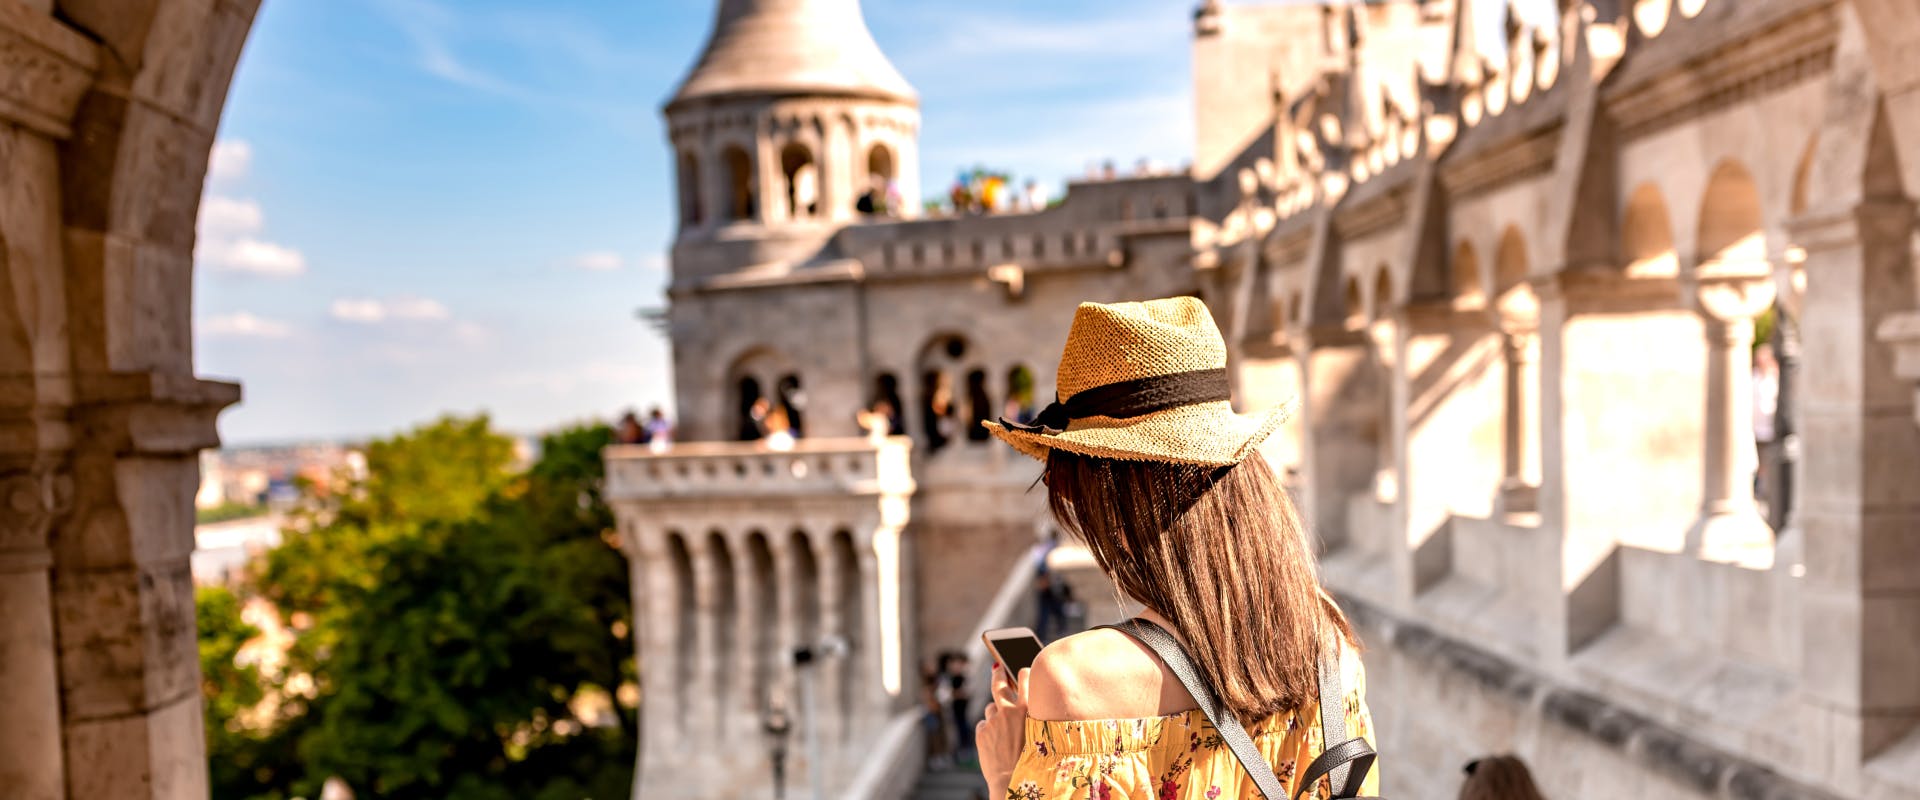 a solo female traveler at the fisherman's bastion in budapest